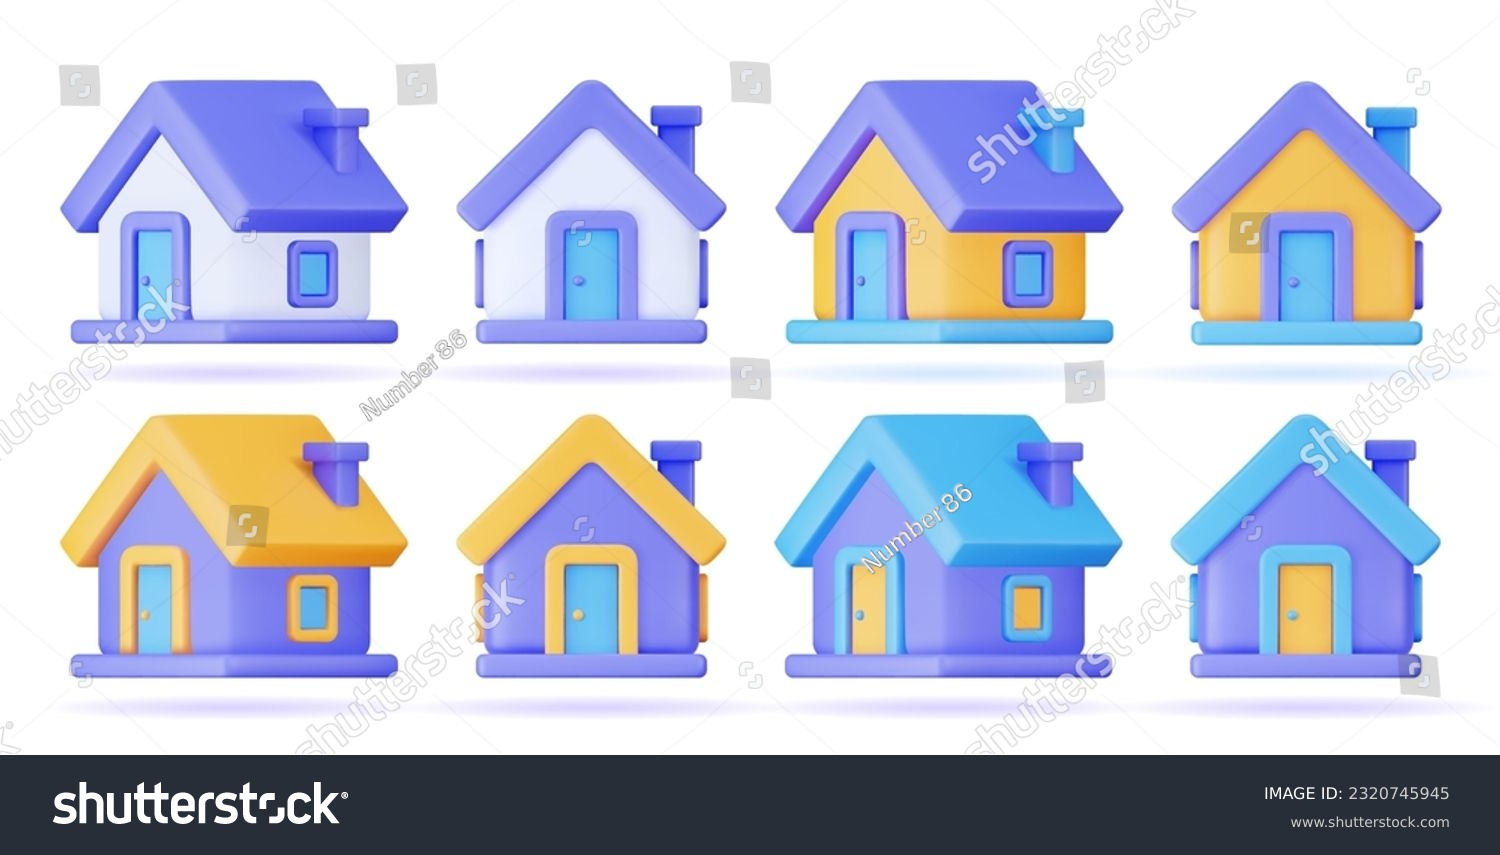 Home 3d vector in a minimalistic style for the interface of applications and web pages. Plastic render of house on isolated white background. 3d cartoon illustration symbol of security and protection. #2320745945